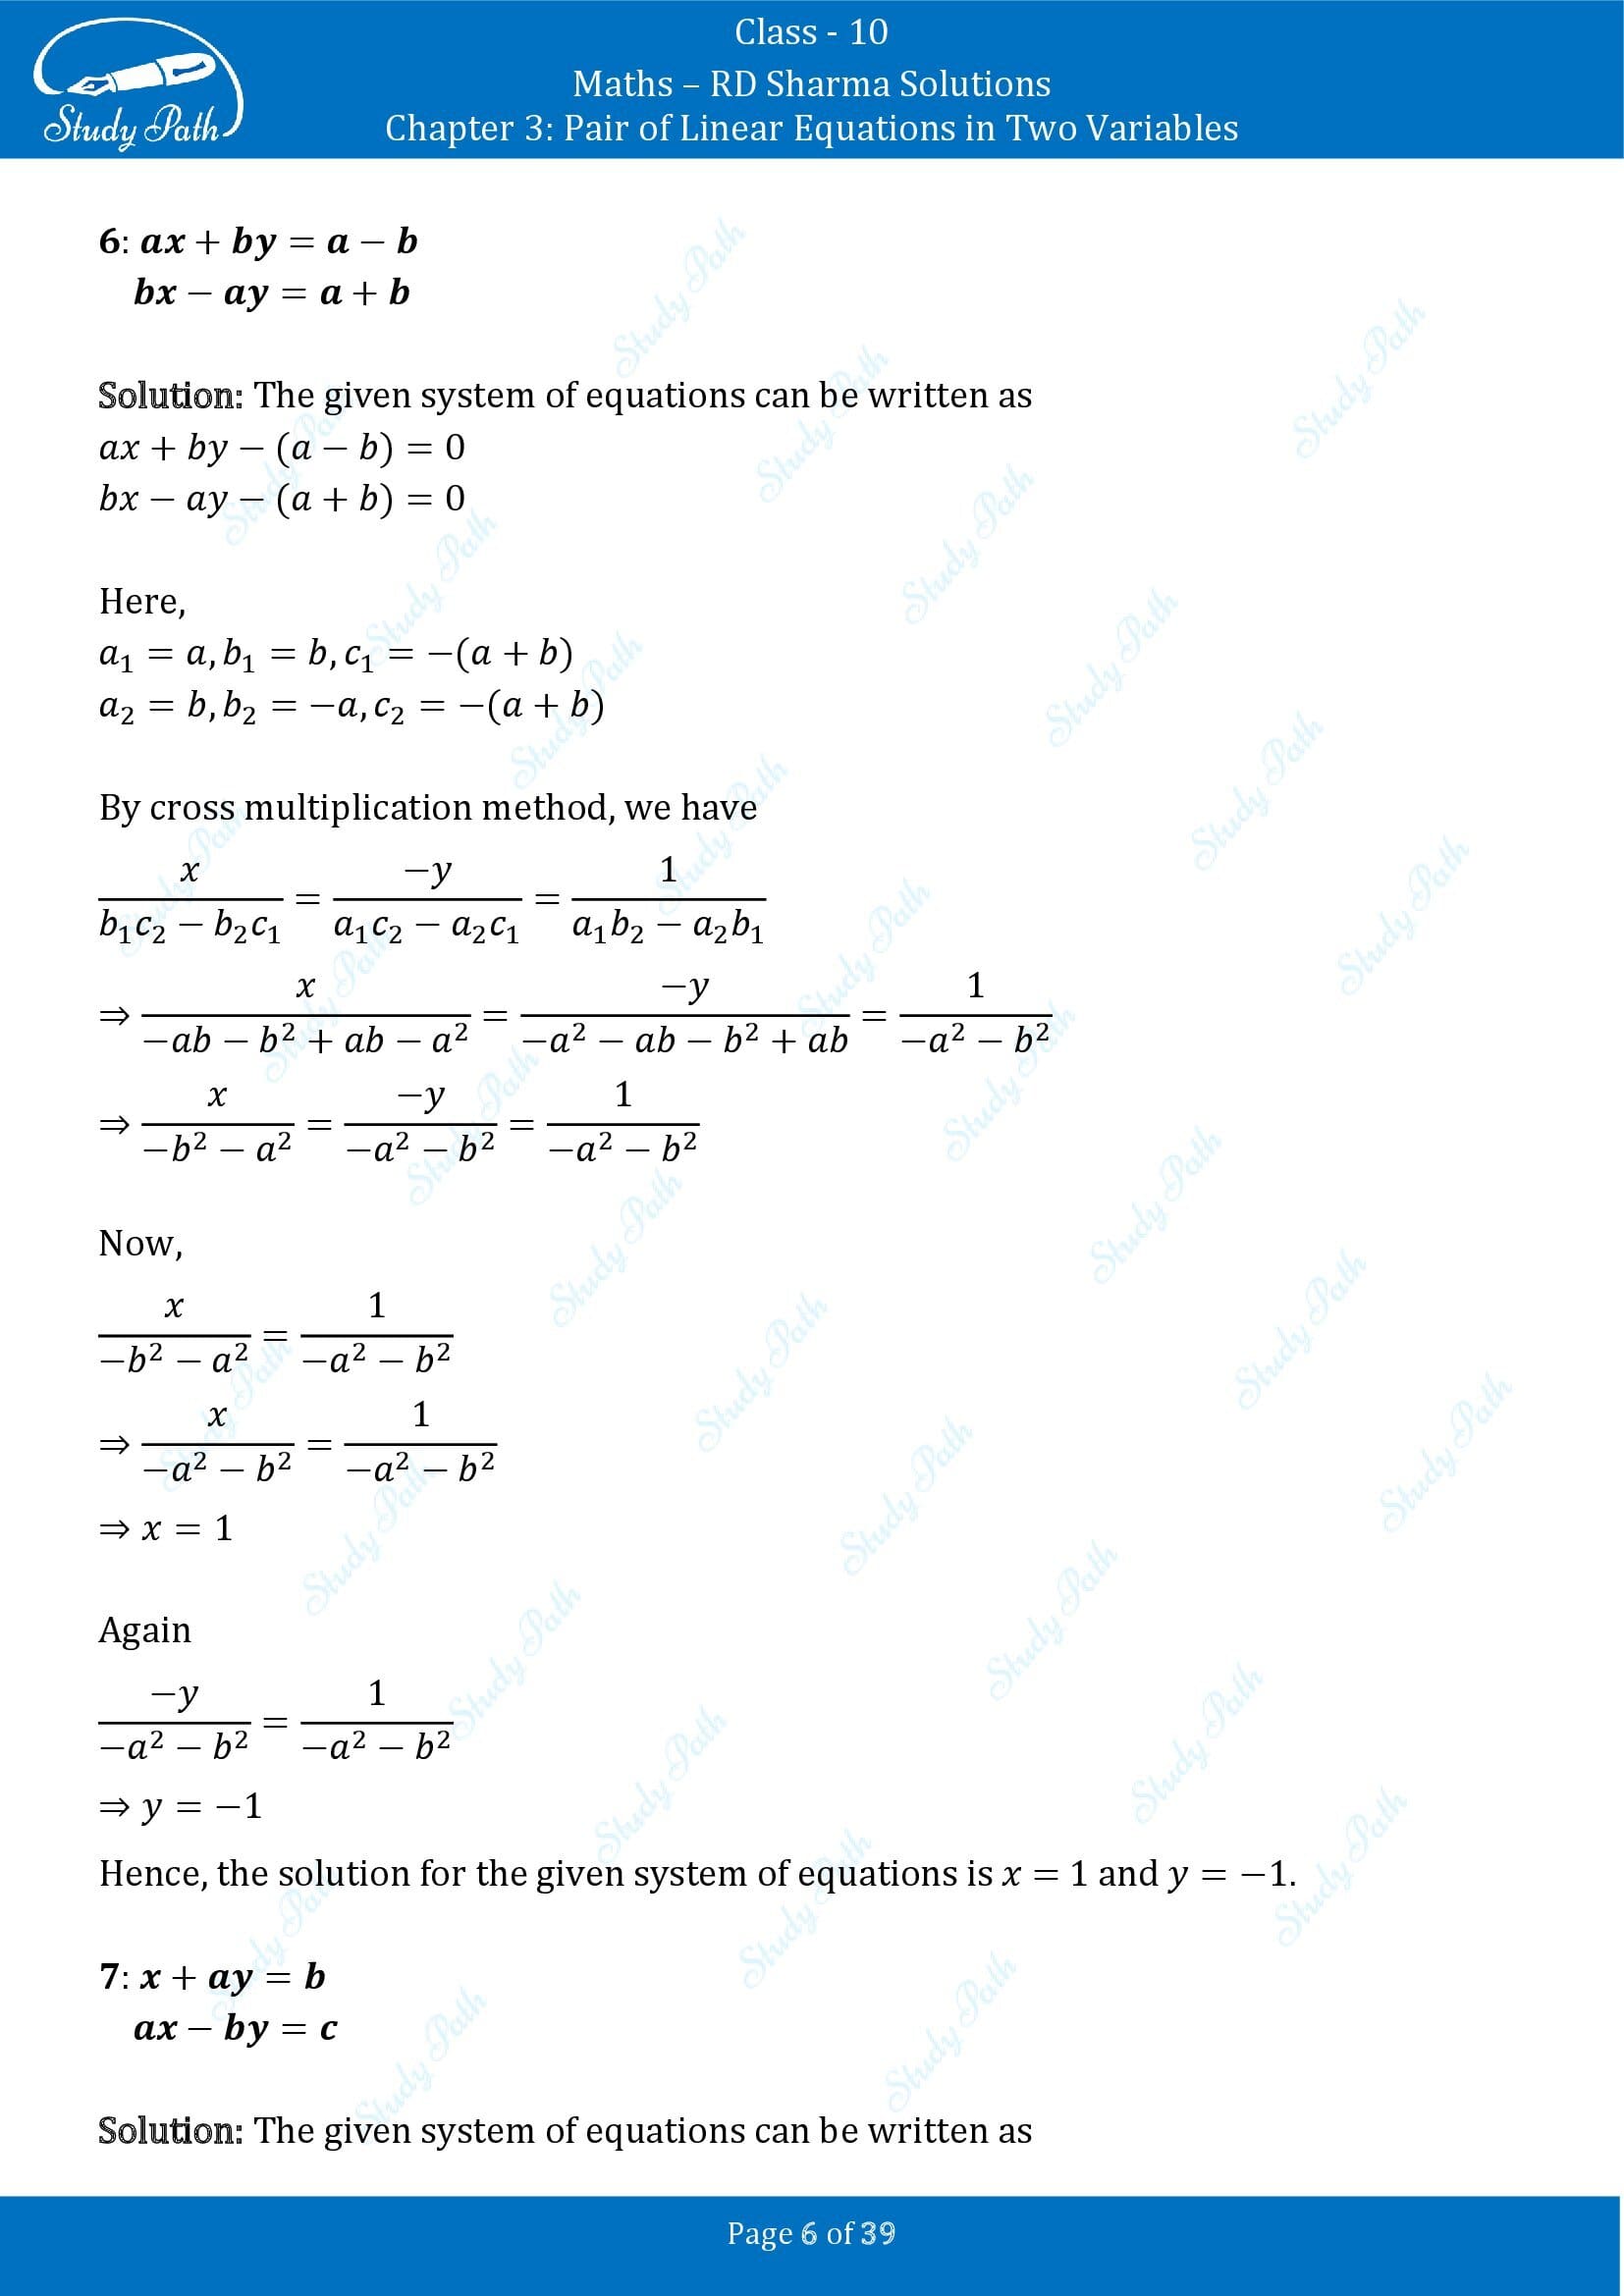 RD Sharma Solutions Class 10 Chapter 3 Pair of Linear Equations in Two Variables Exercise 3.4 00006